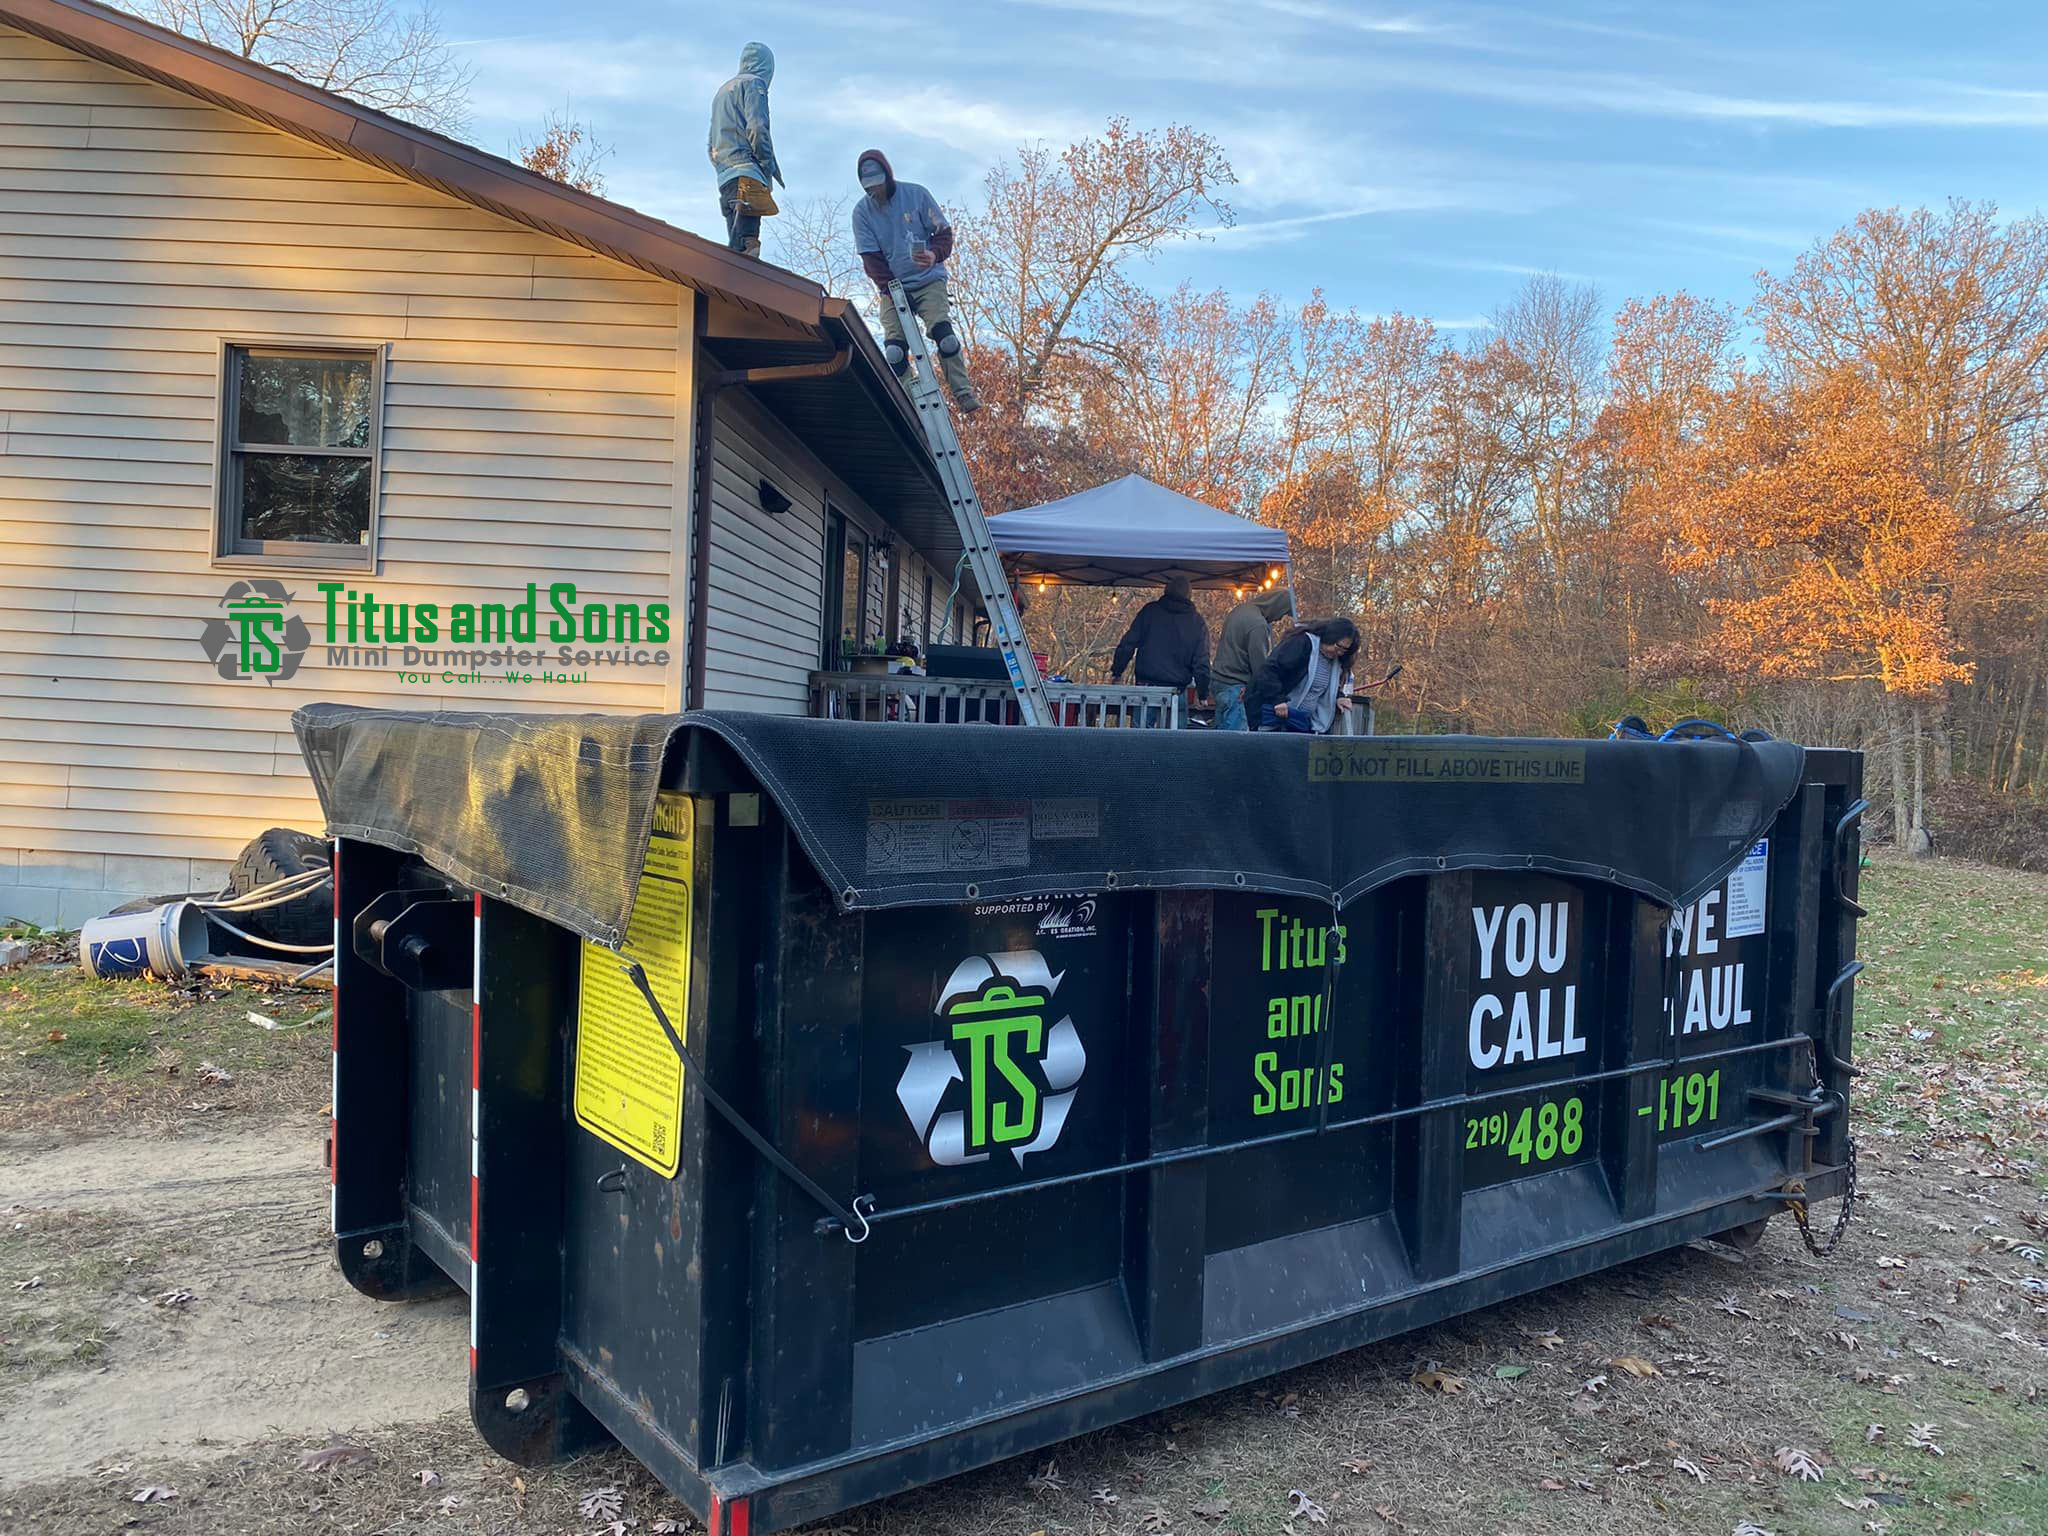 Reliable Dumpster Rental Titus Dumpster Rental Titus & Sons Crown Point IN